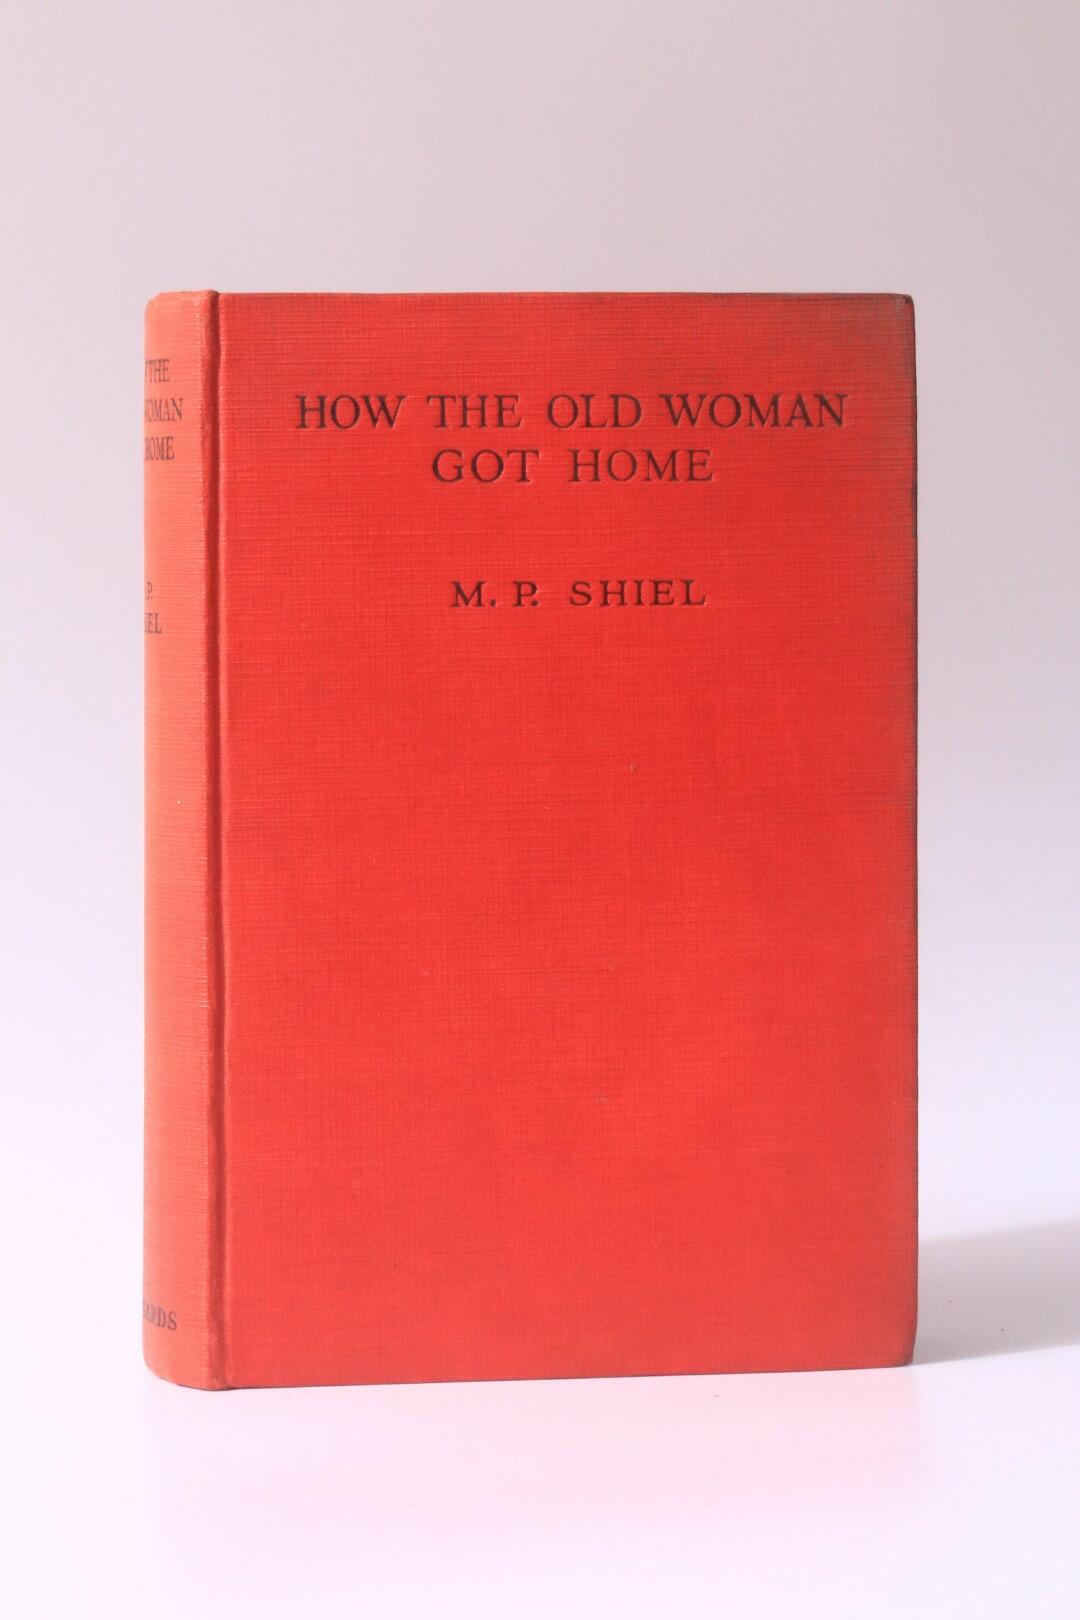 M.P. Shiel - How the Old Woman Got Home - The Richards Press, 1927, First Edition.